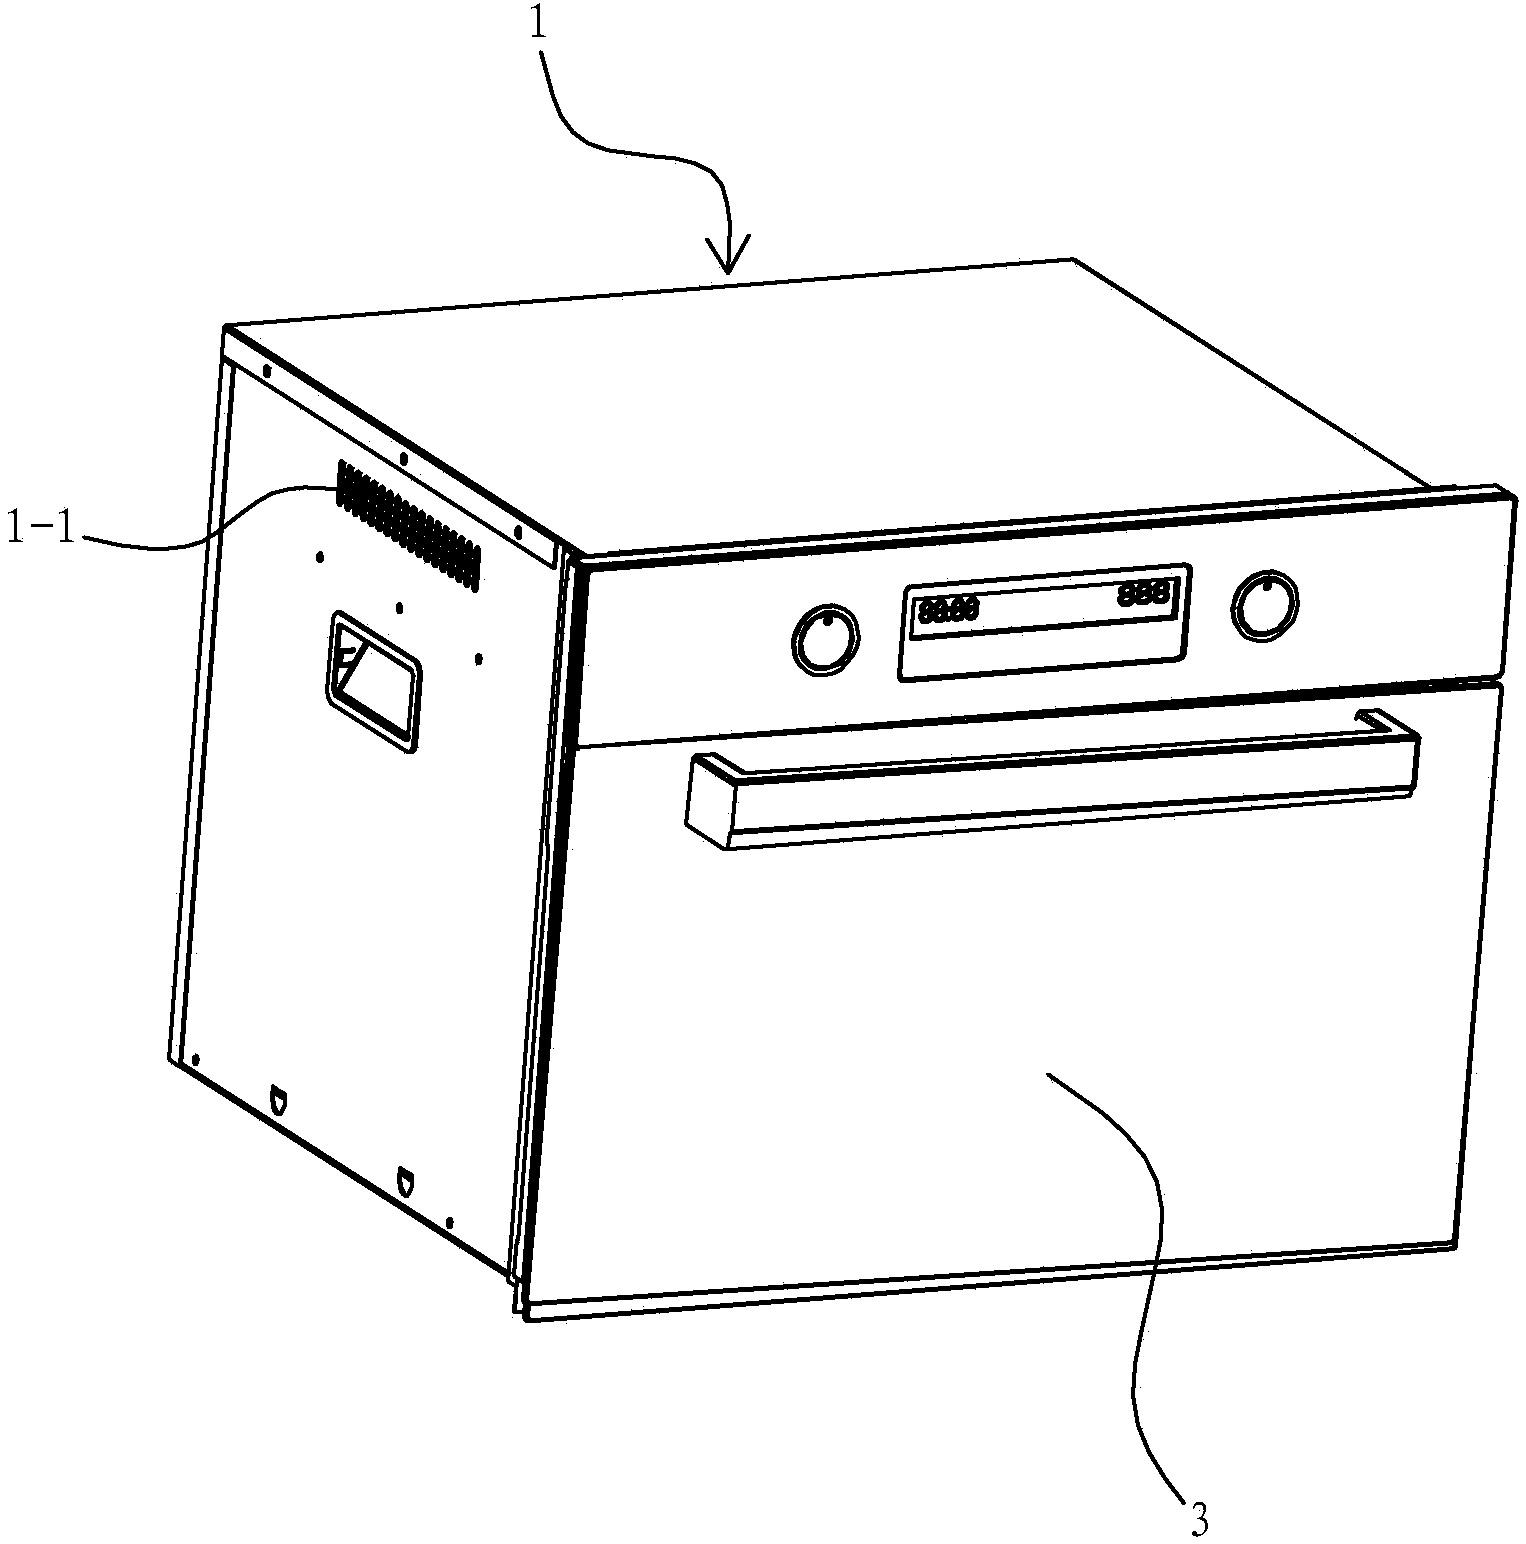 Steam box and microwave oven all-in-one machine